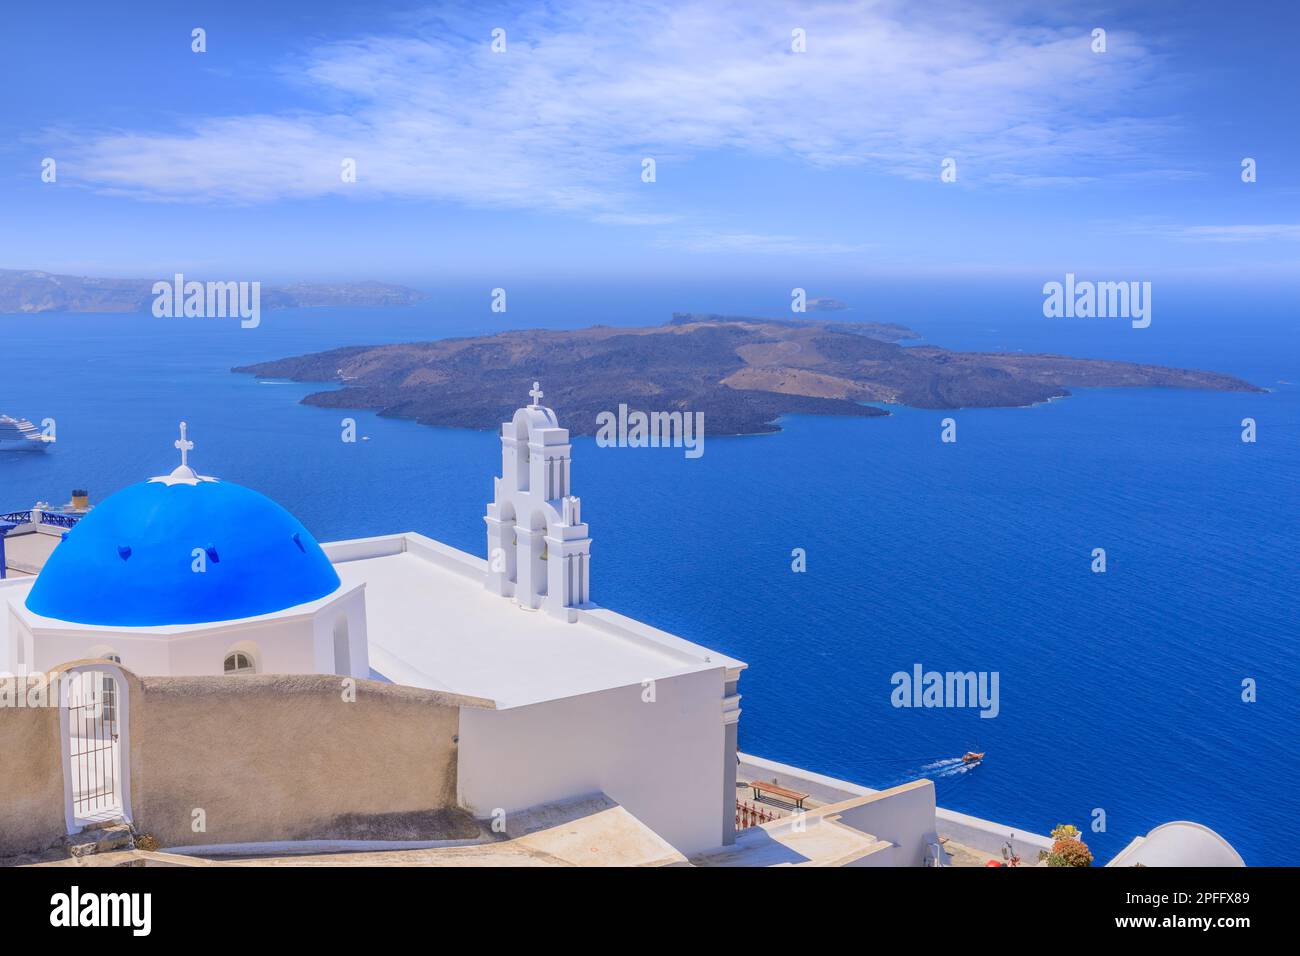 TheThree Bells of Fira, a Greek Catholic church in Santorini, member of the Cyclades group of islands in Greece. Stock Photo